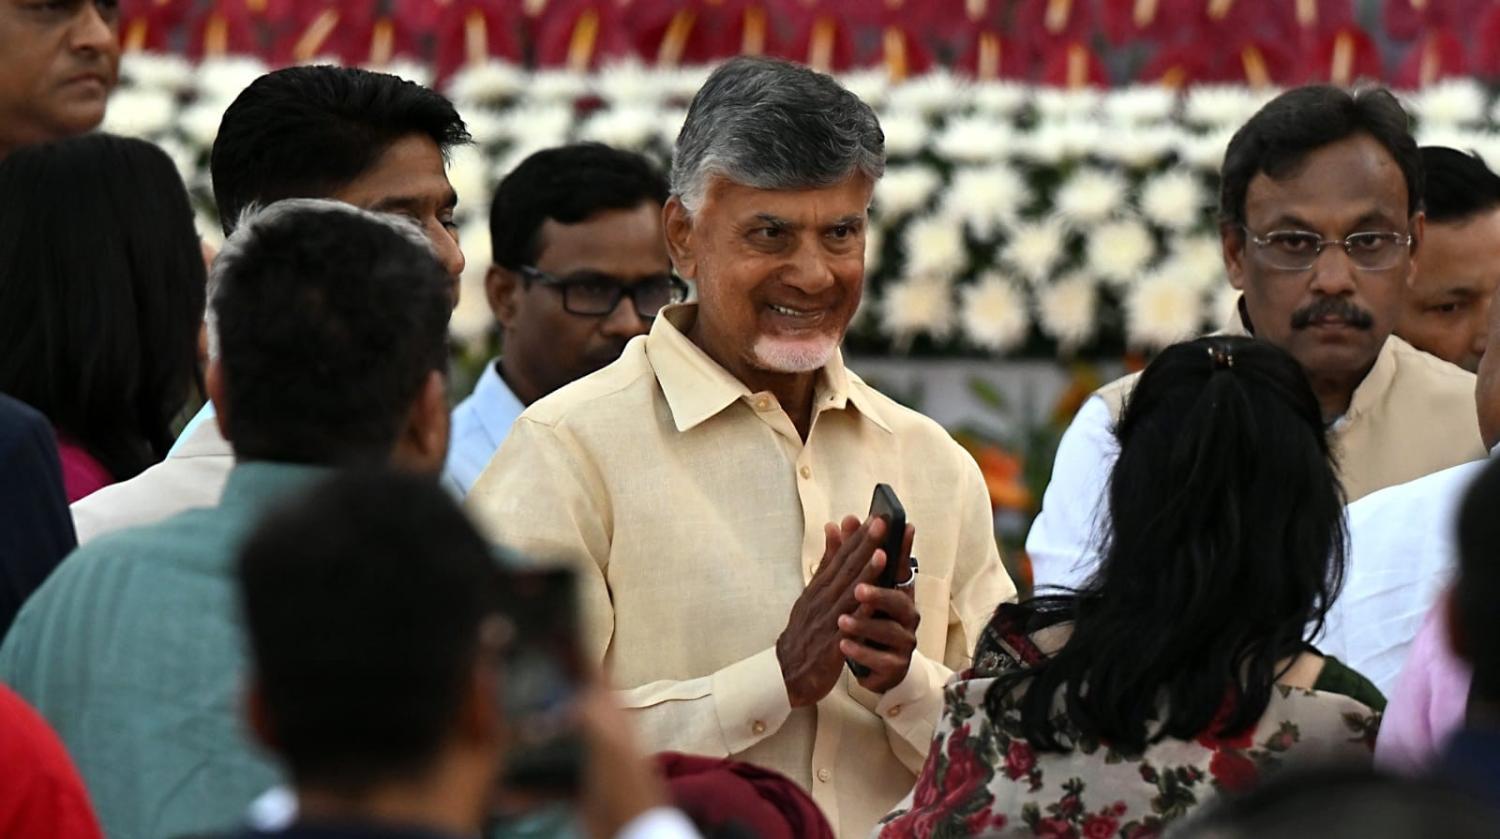 Chandrababu Naidu, leader of the Telugu Desam Party, centre, attends a swearing-in ceremony for Narendra Modi on 9 June (Prakash Singh/Bloomberg via Getty Images)